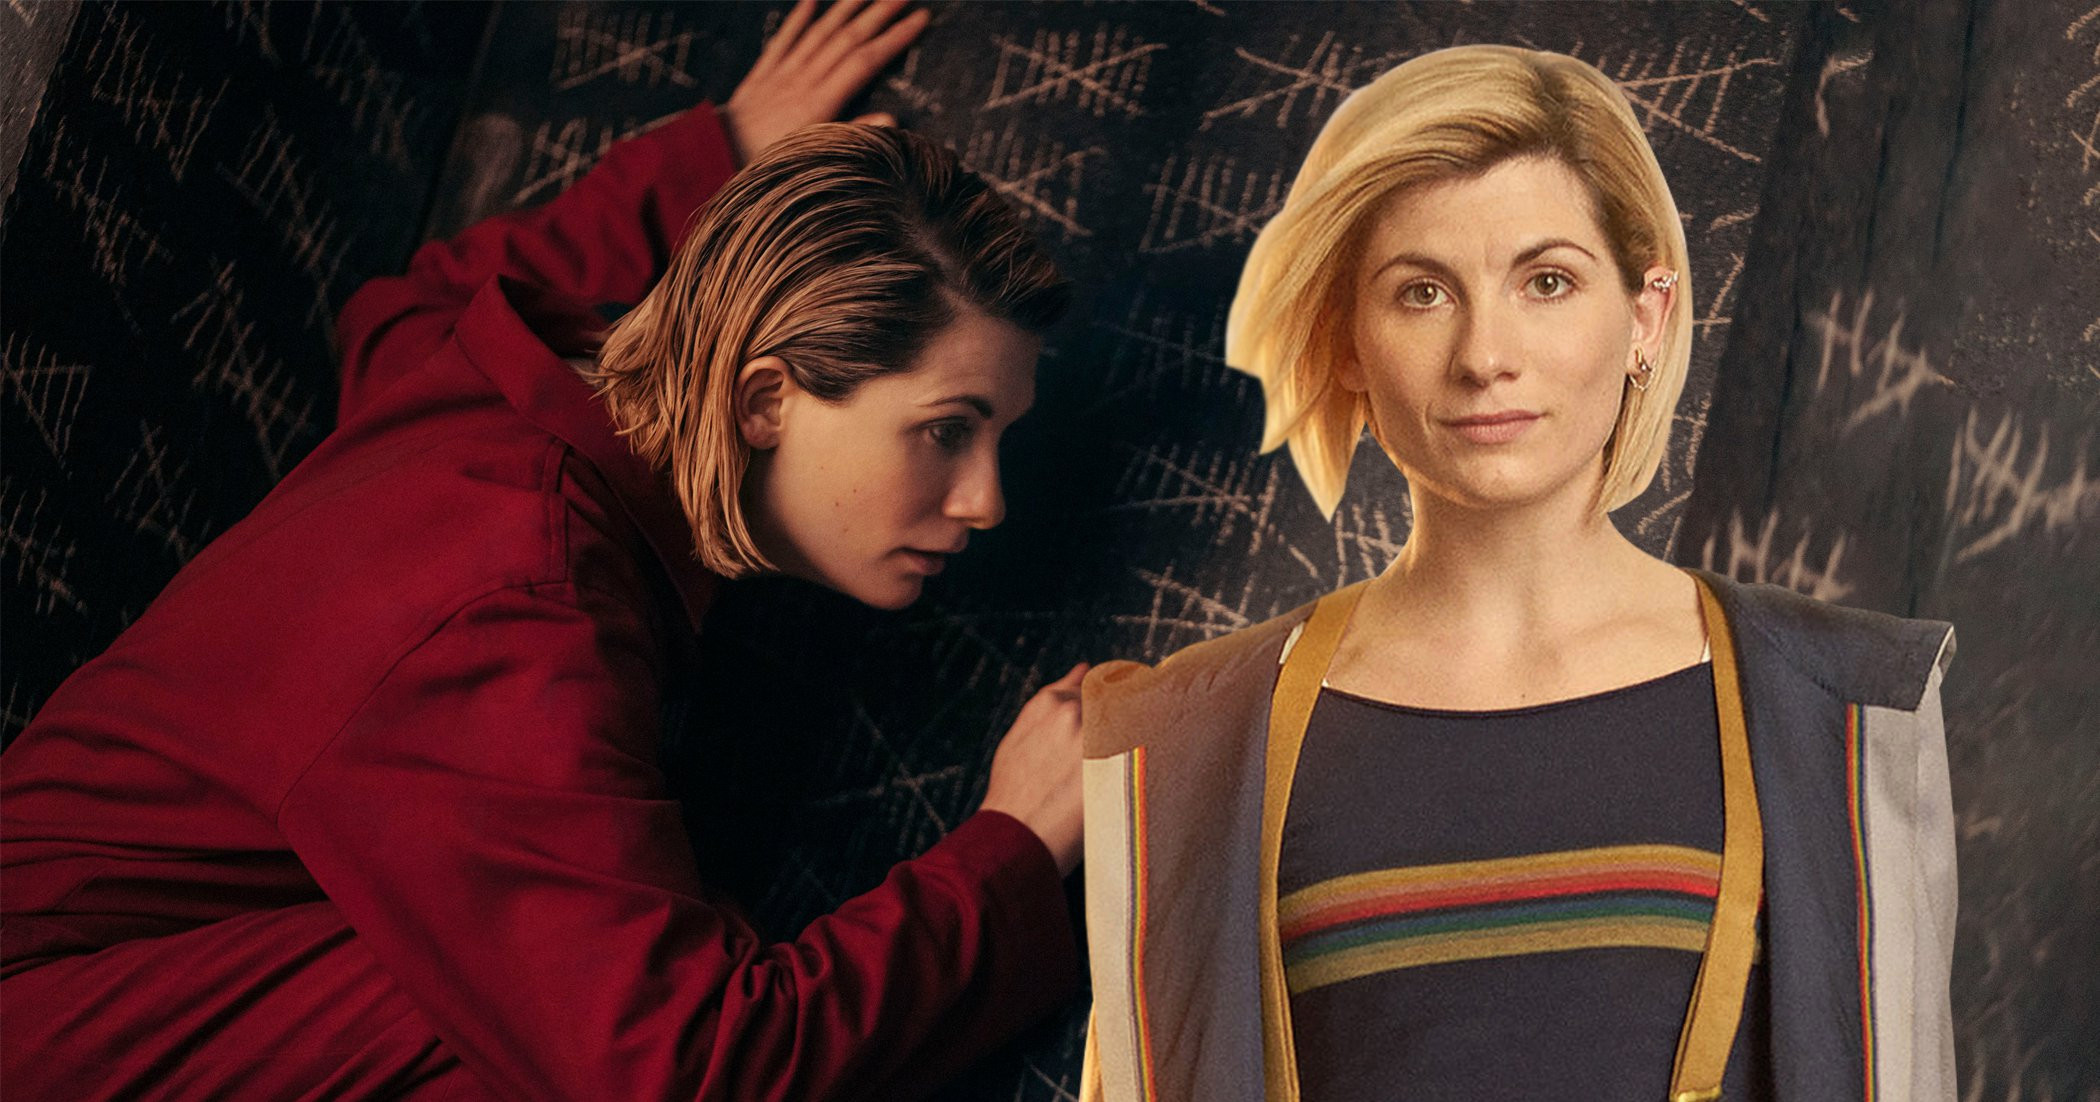 Jodie Whittaker ‘cautious’ filming her final Doctor Who season during Covid-19 pandemic